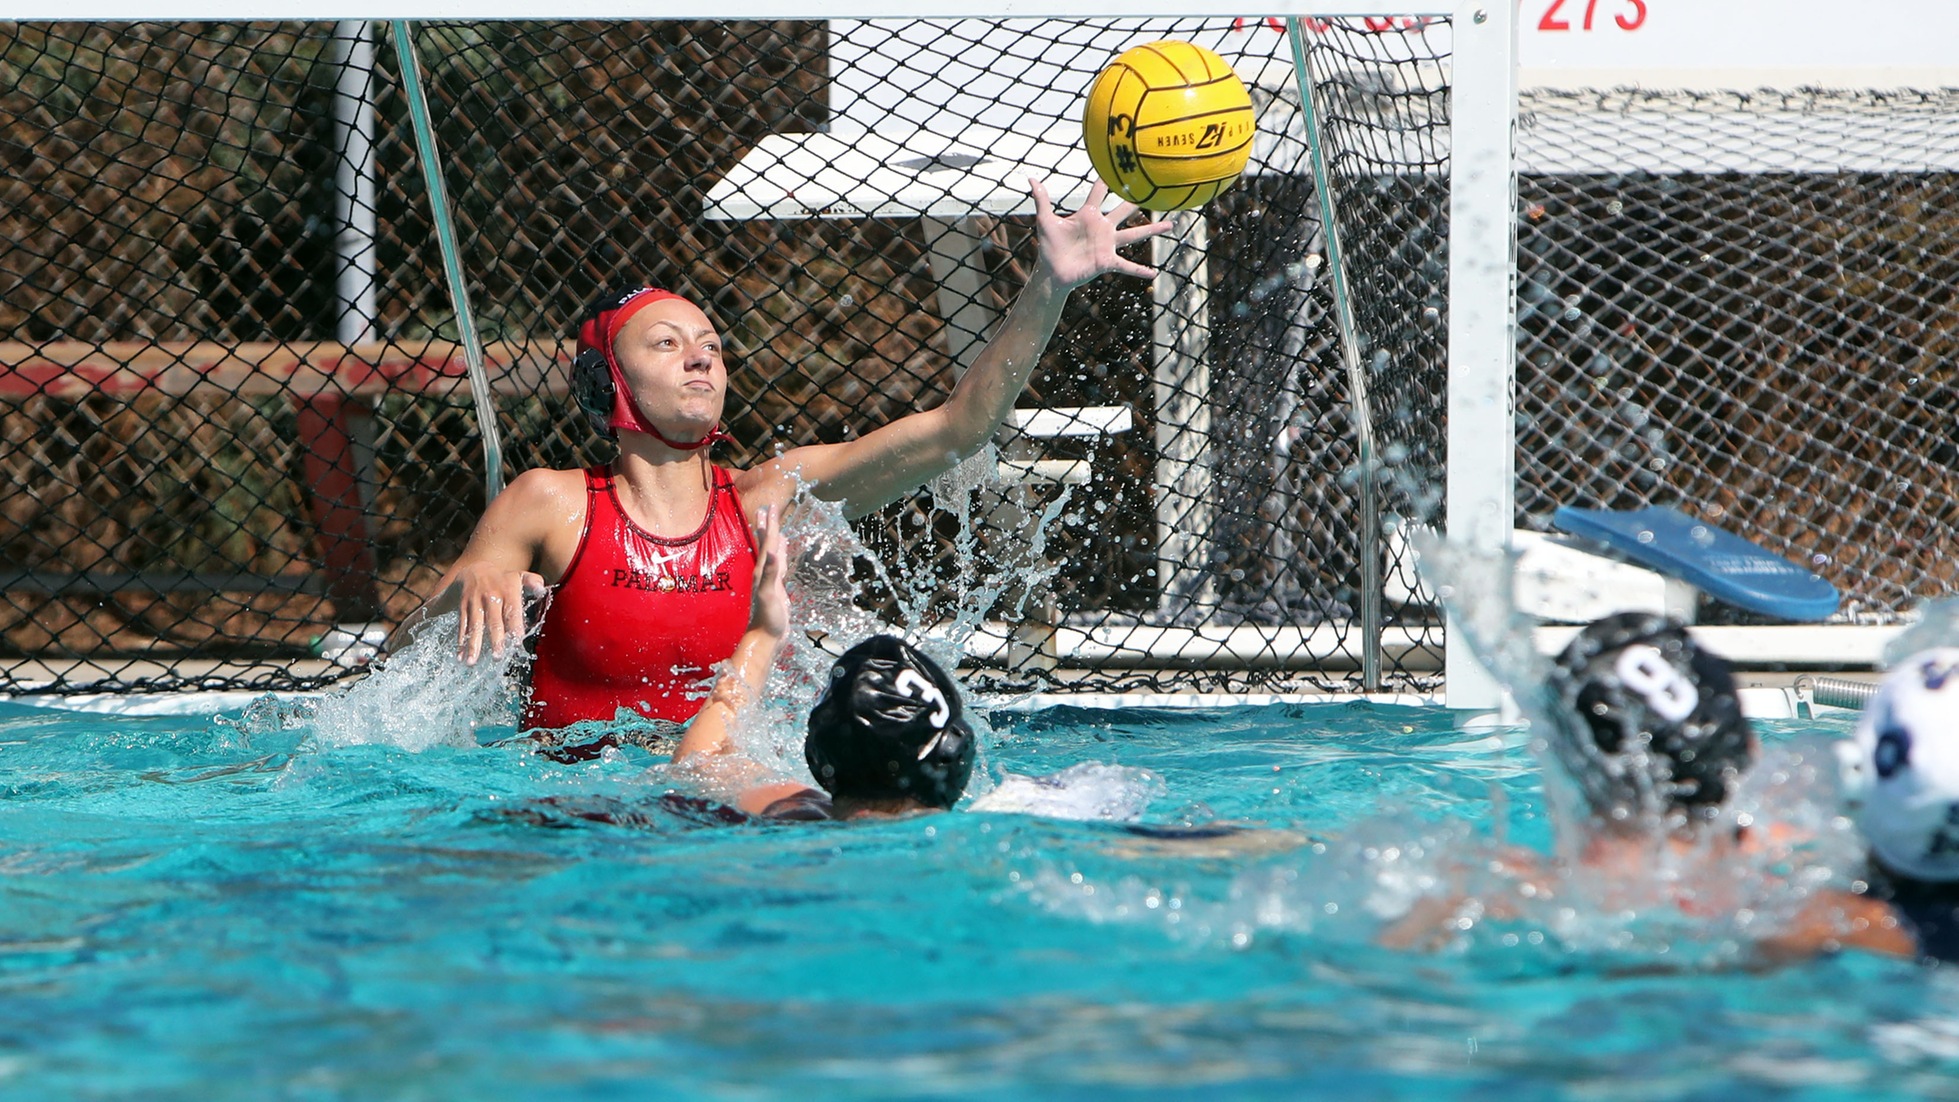 Julia Miller gets a save early in the second quarter. Photo by Hugh Cox.